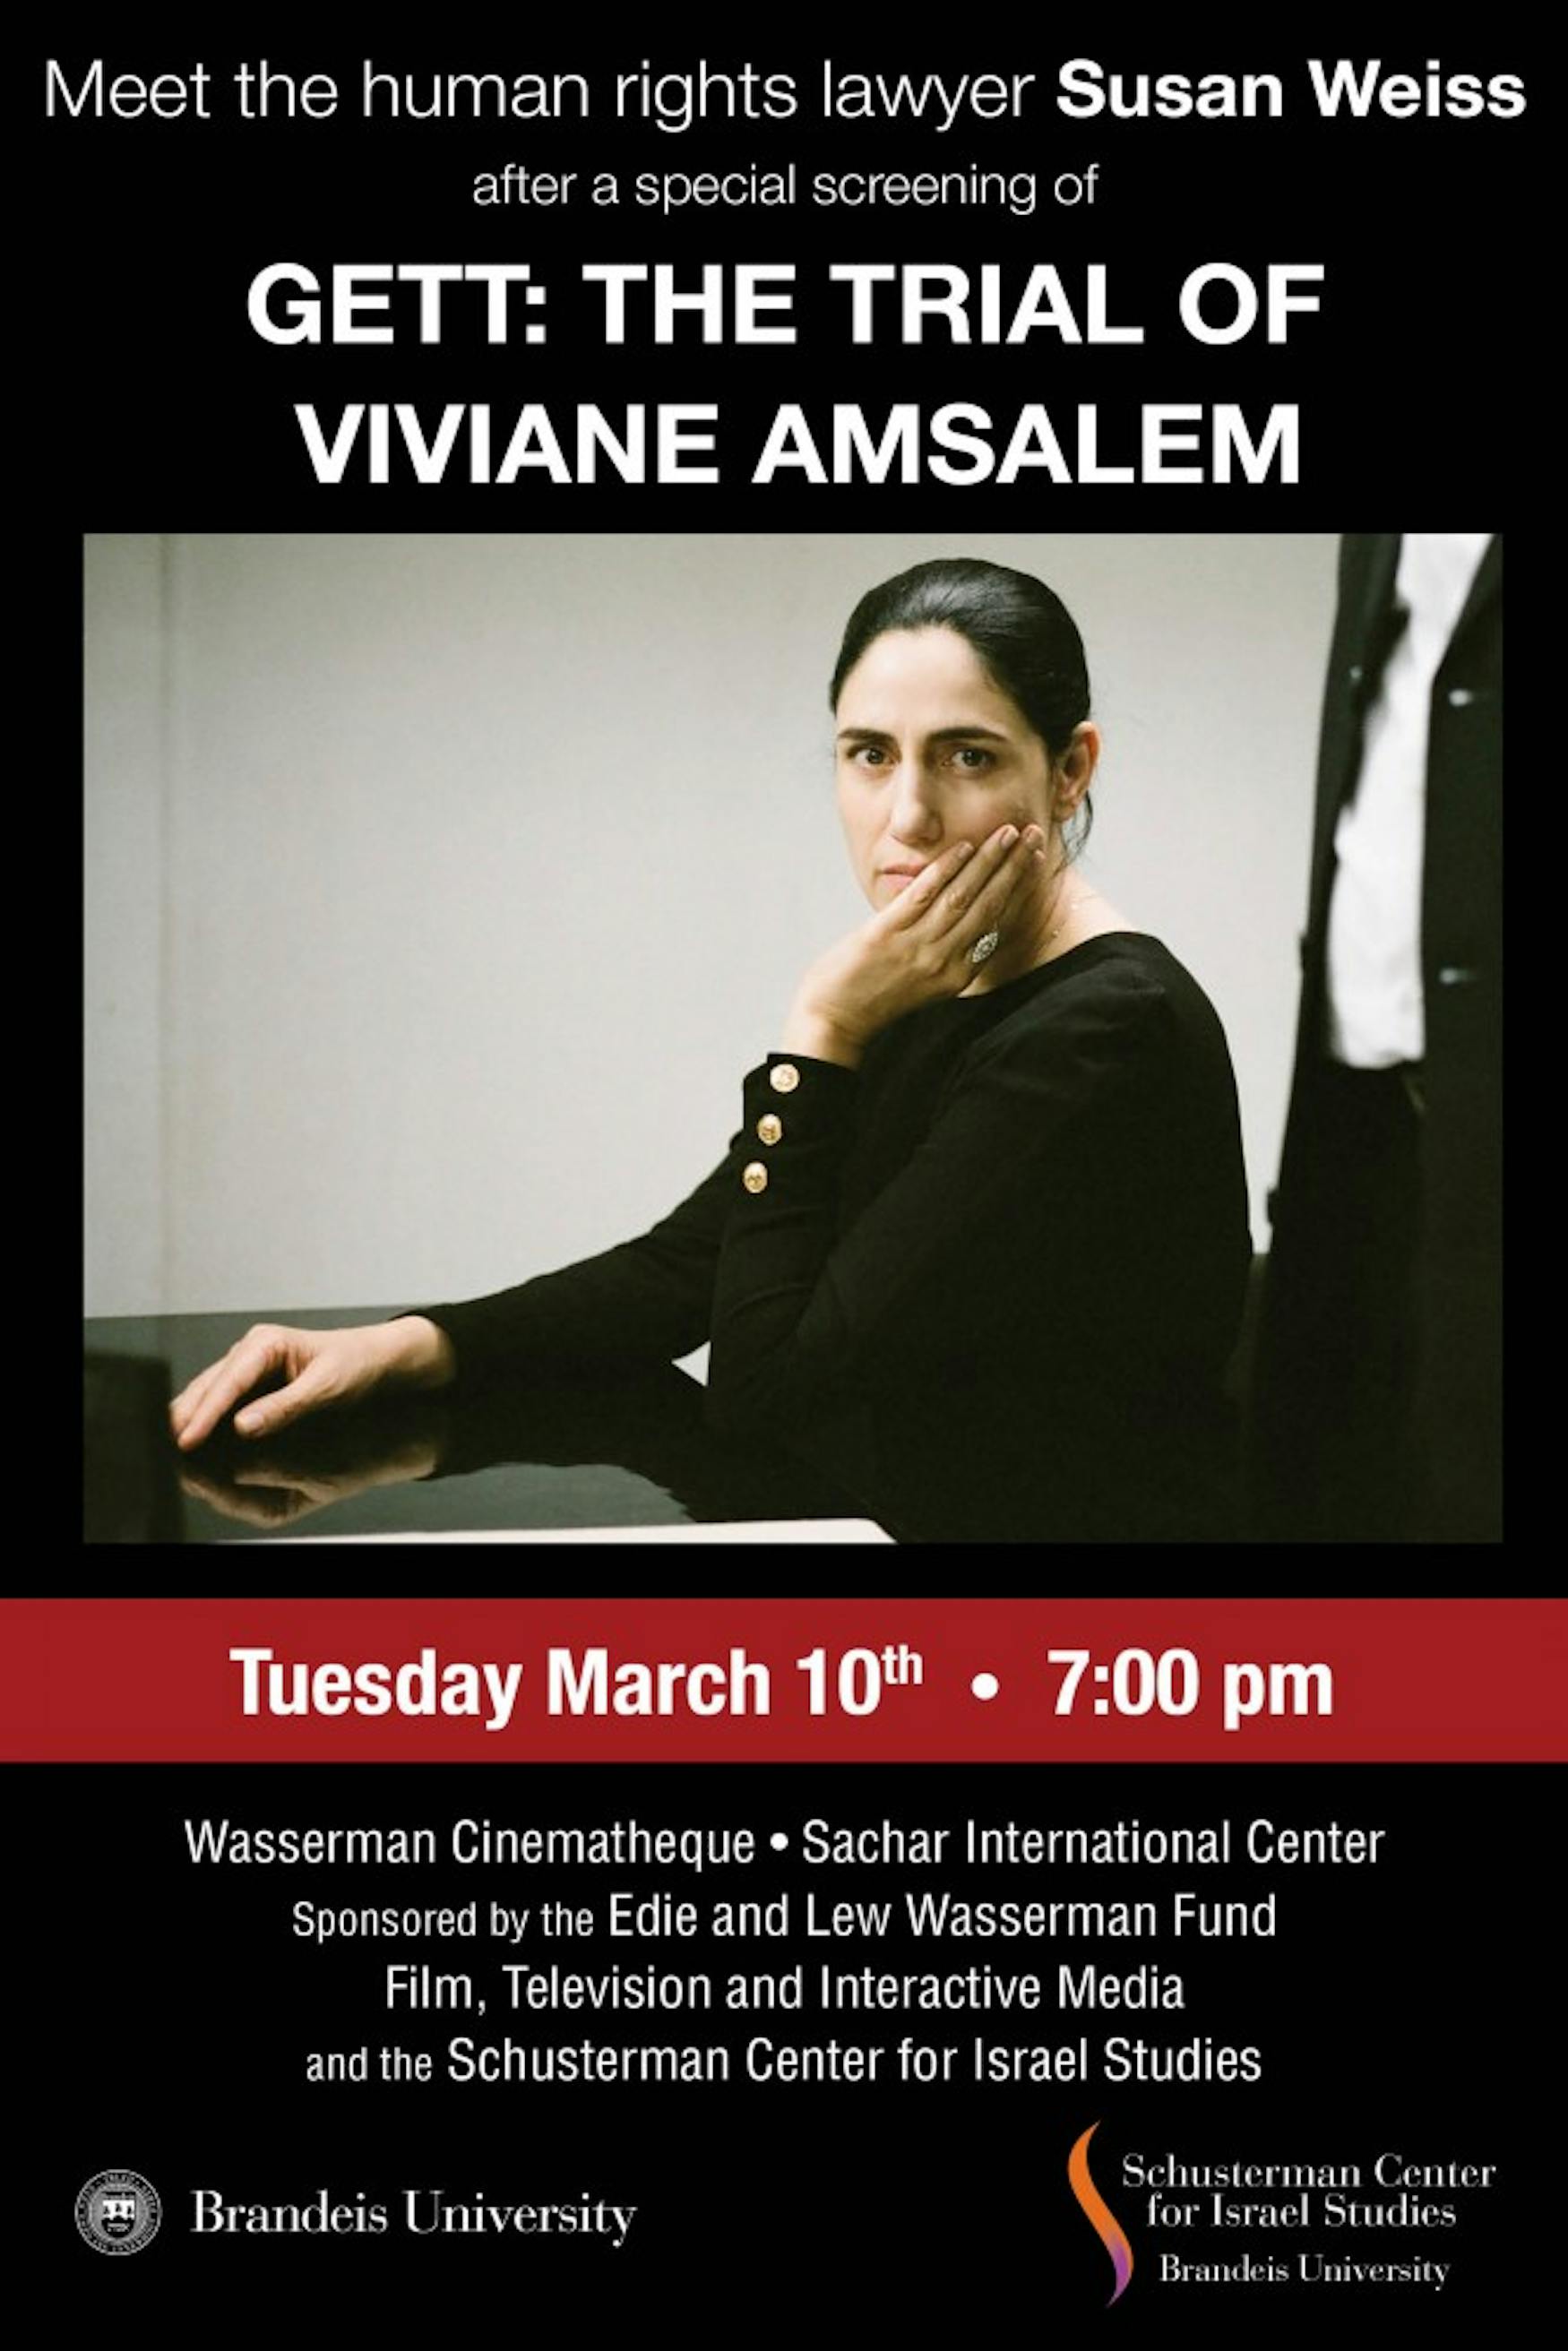 FILM FLYER: The Film, Television and Interactive Media Program worked with the Schusterman Center for Israel studies to screen the film before its official release.